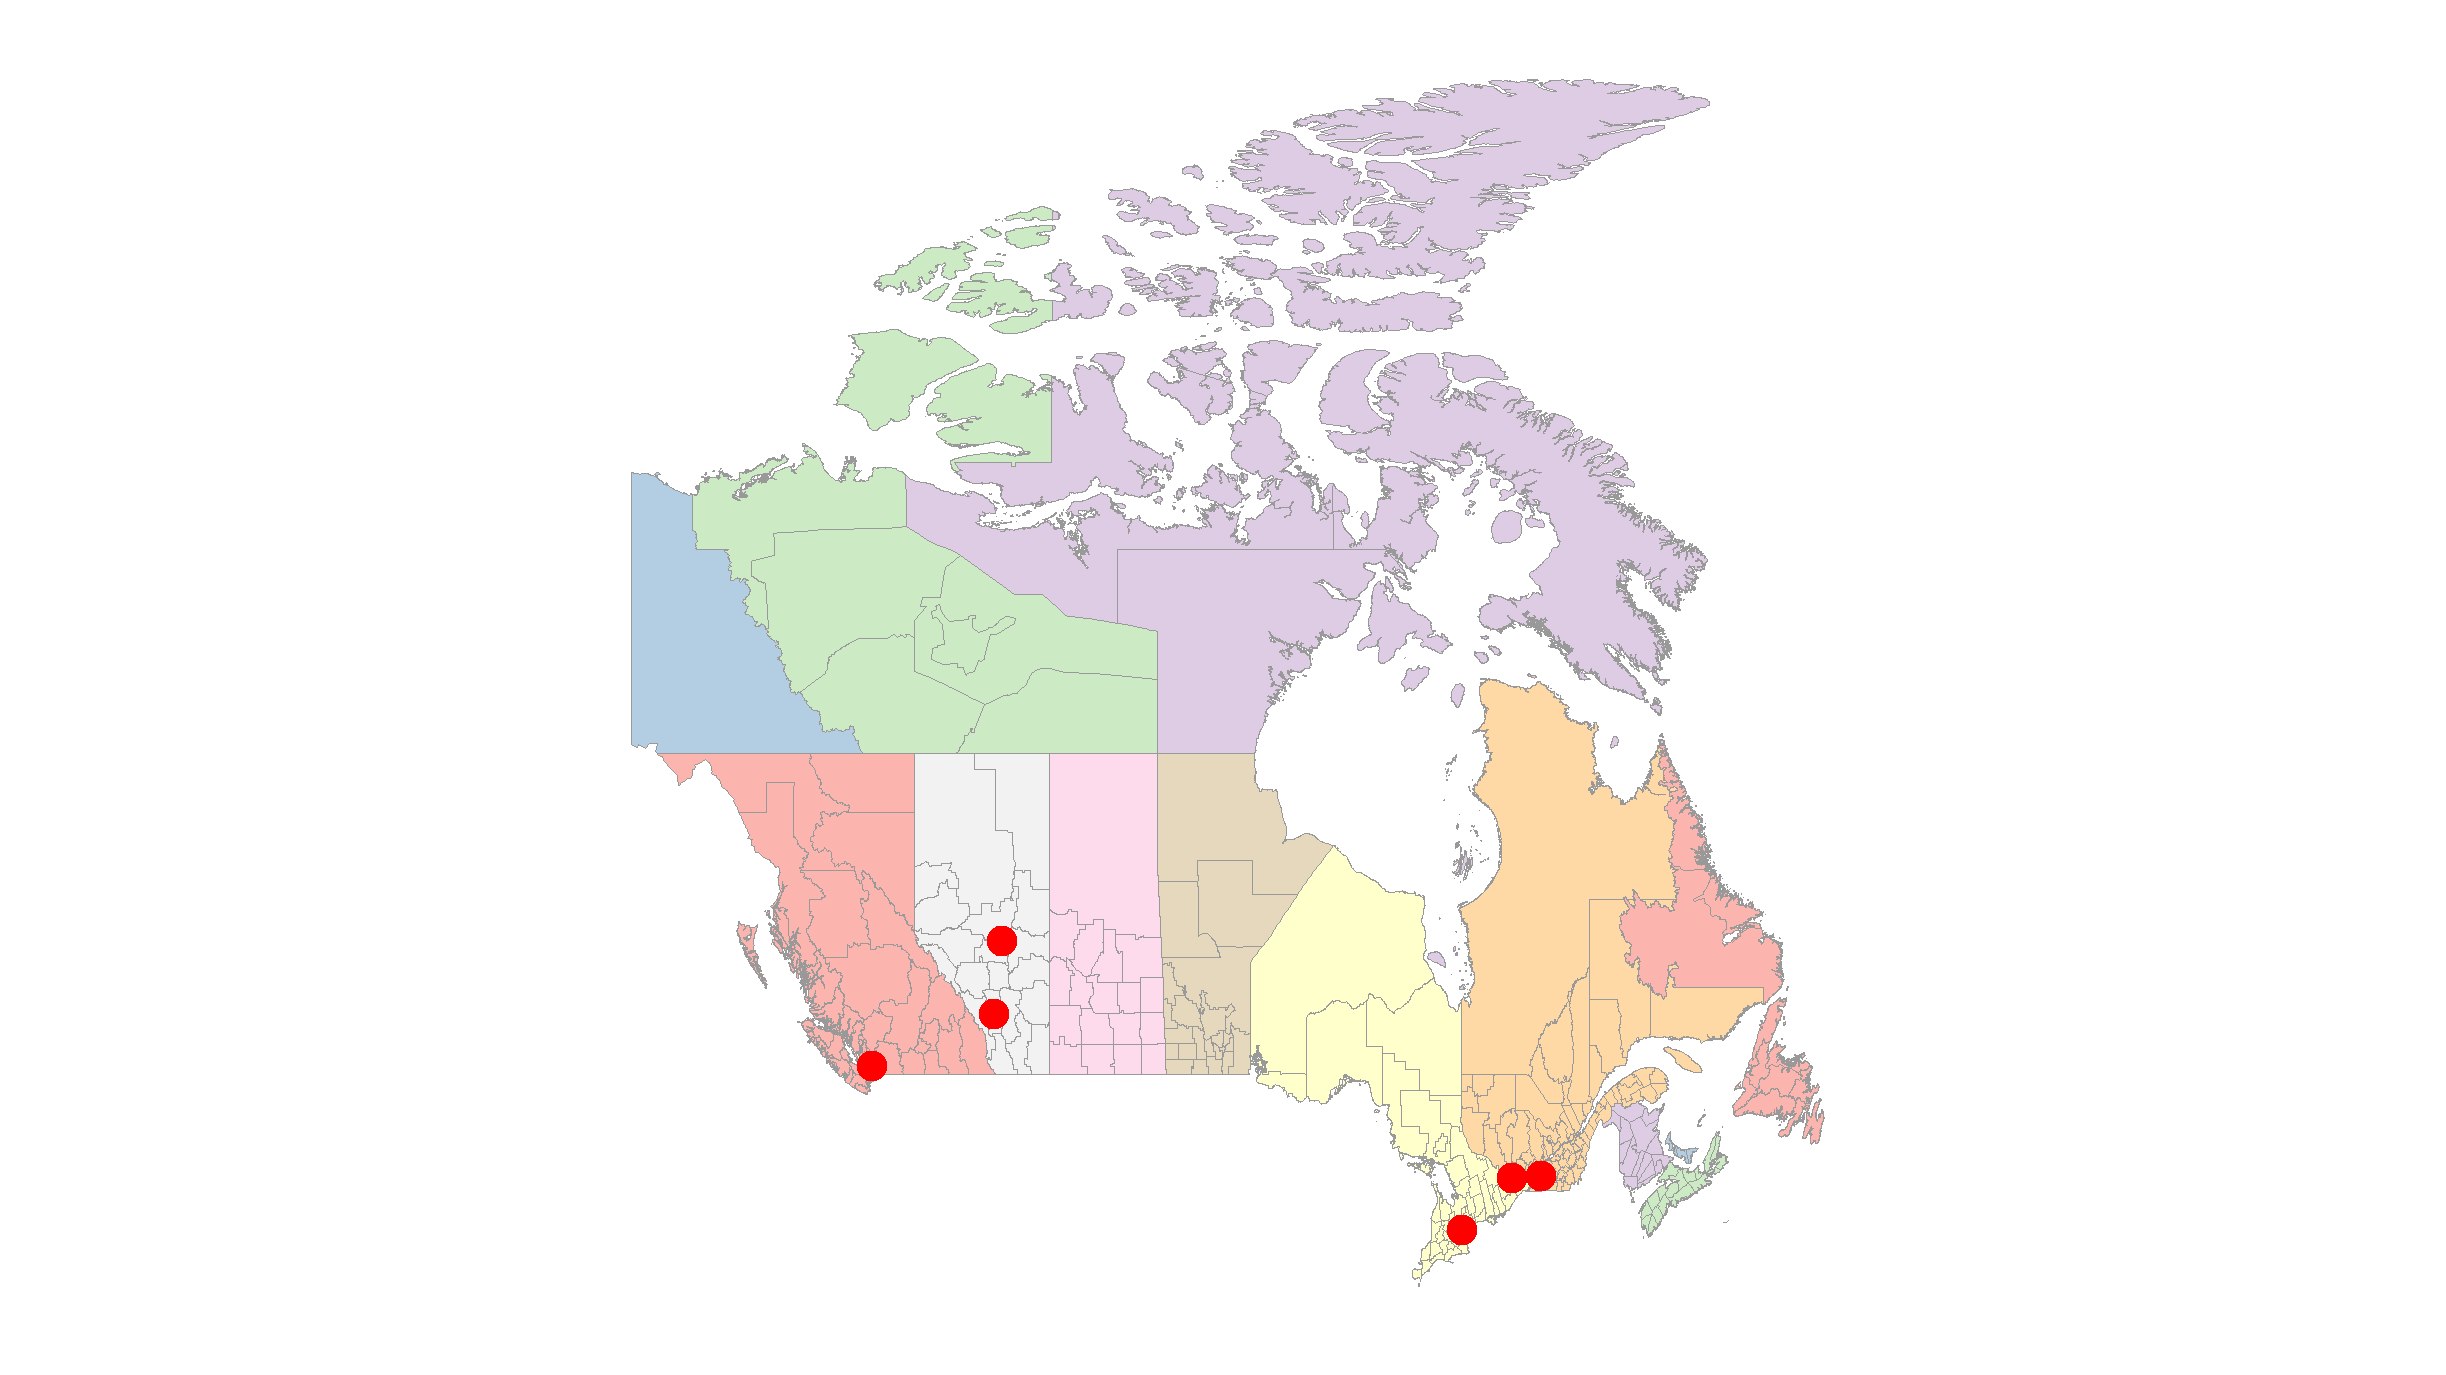 Canada Maps without CRS transformation